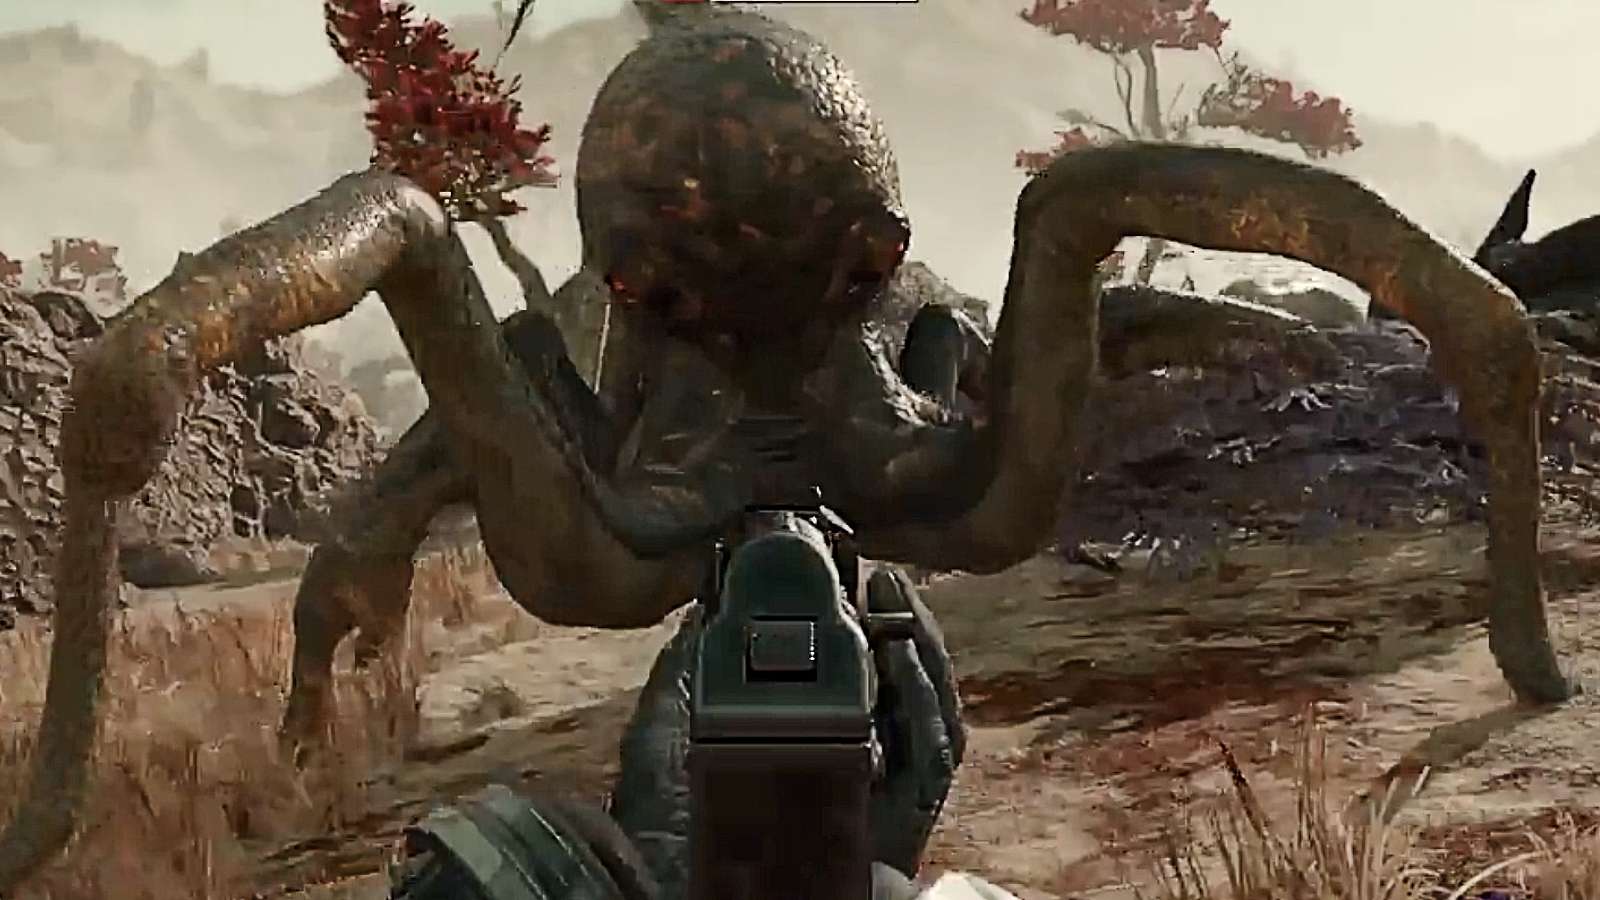 Starfield octopus-spider hybrid could be Bethesda's scariest enemy